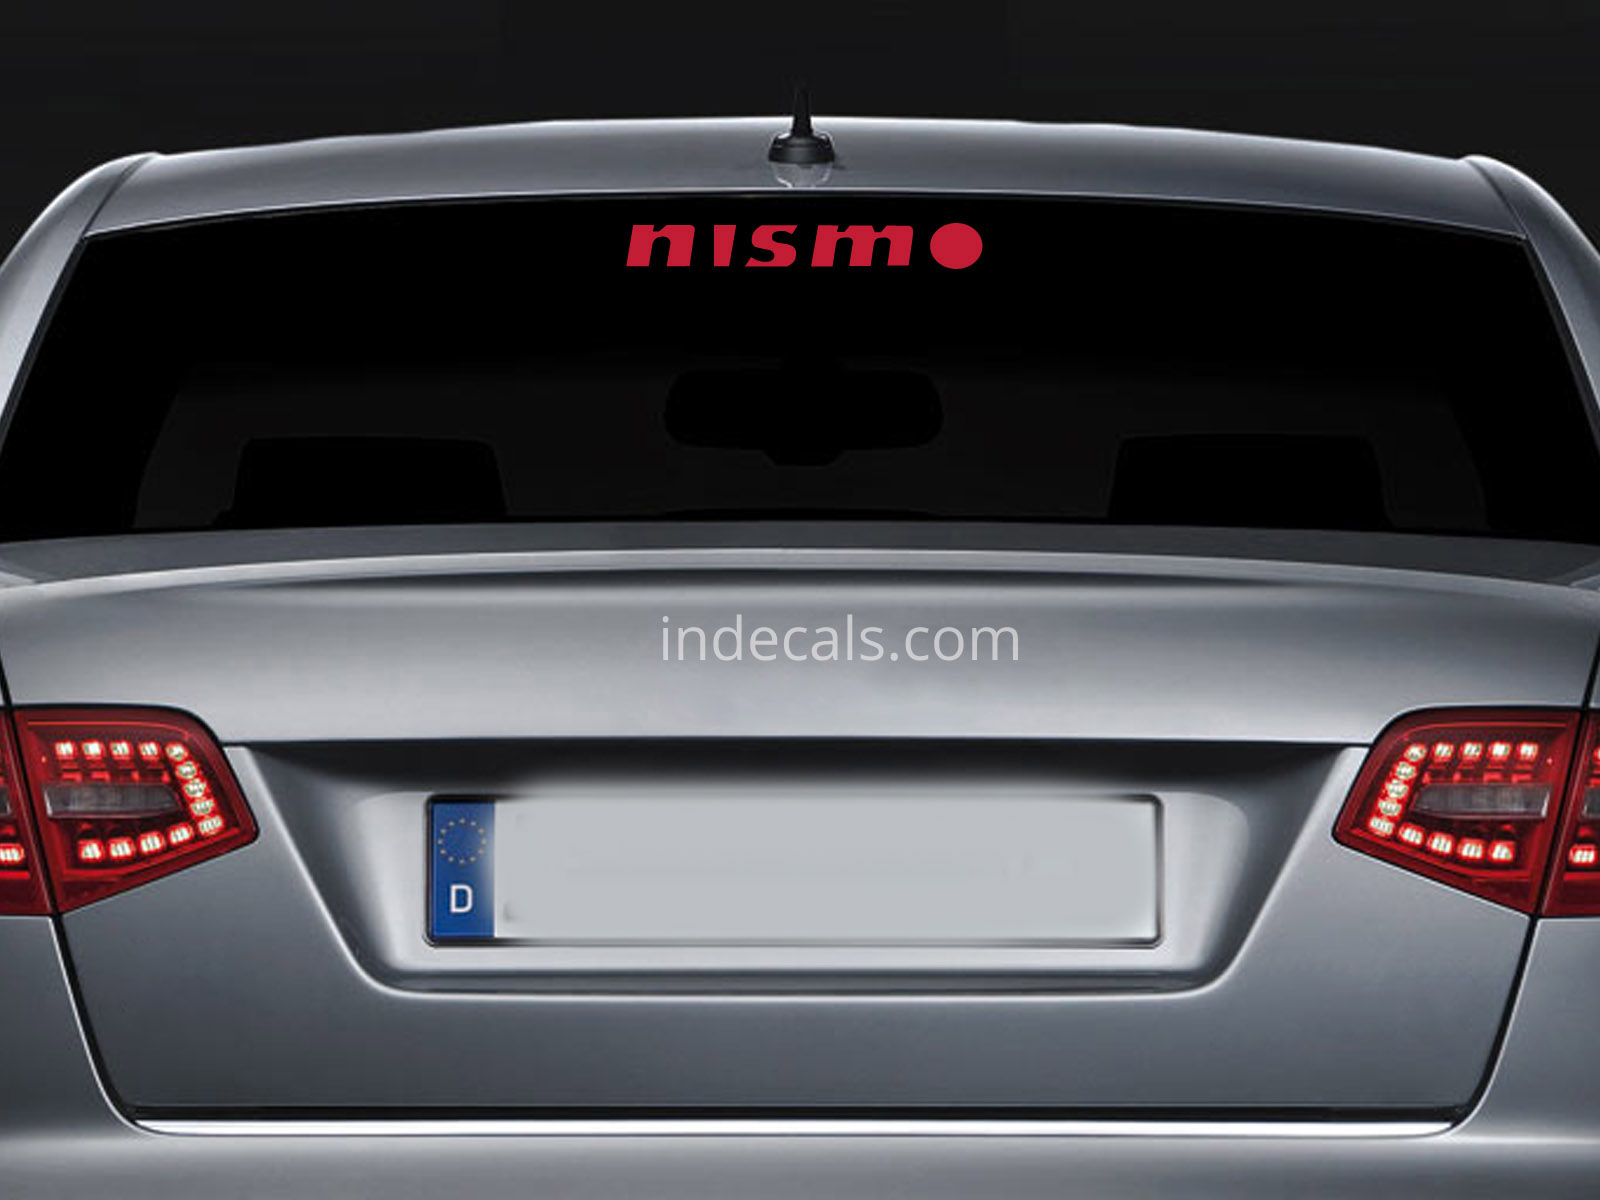 1 x Nismo Sticker for Windshield or Back Window - Red